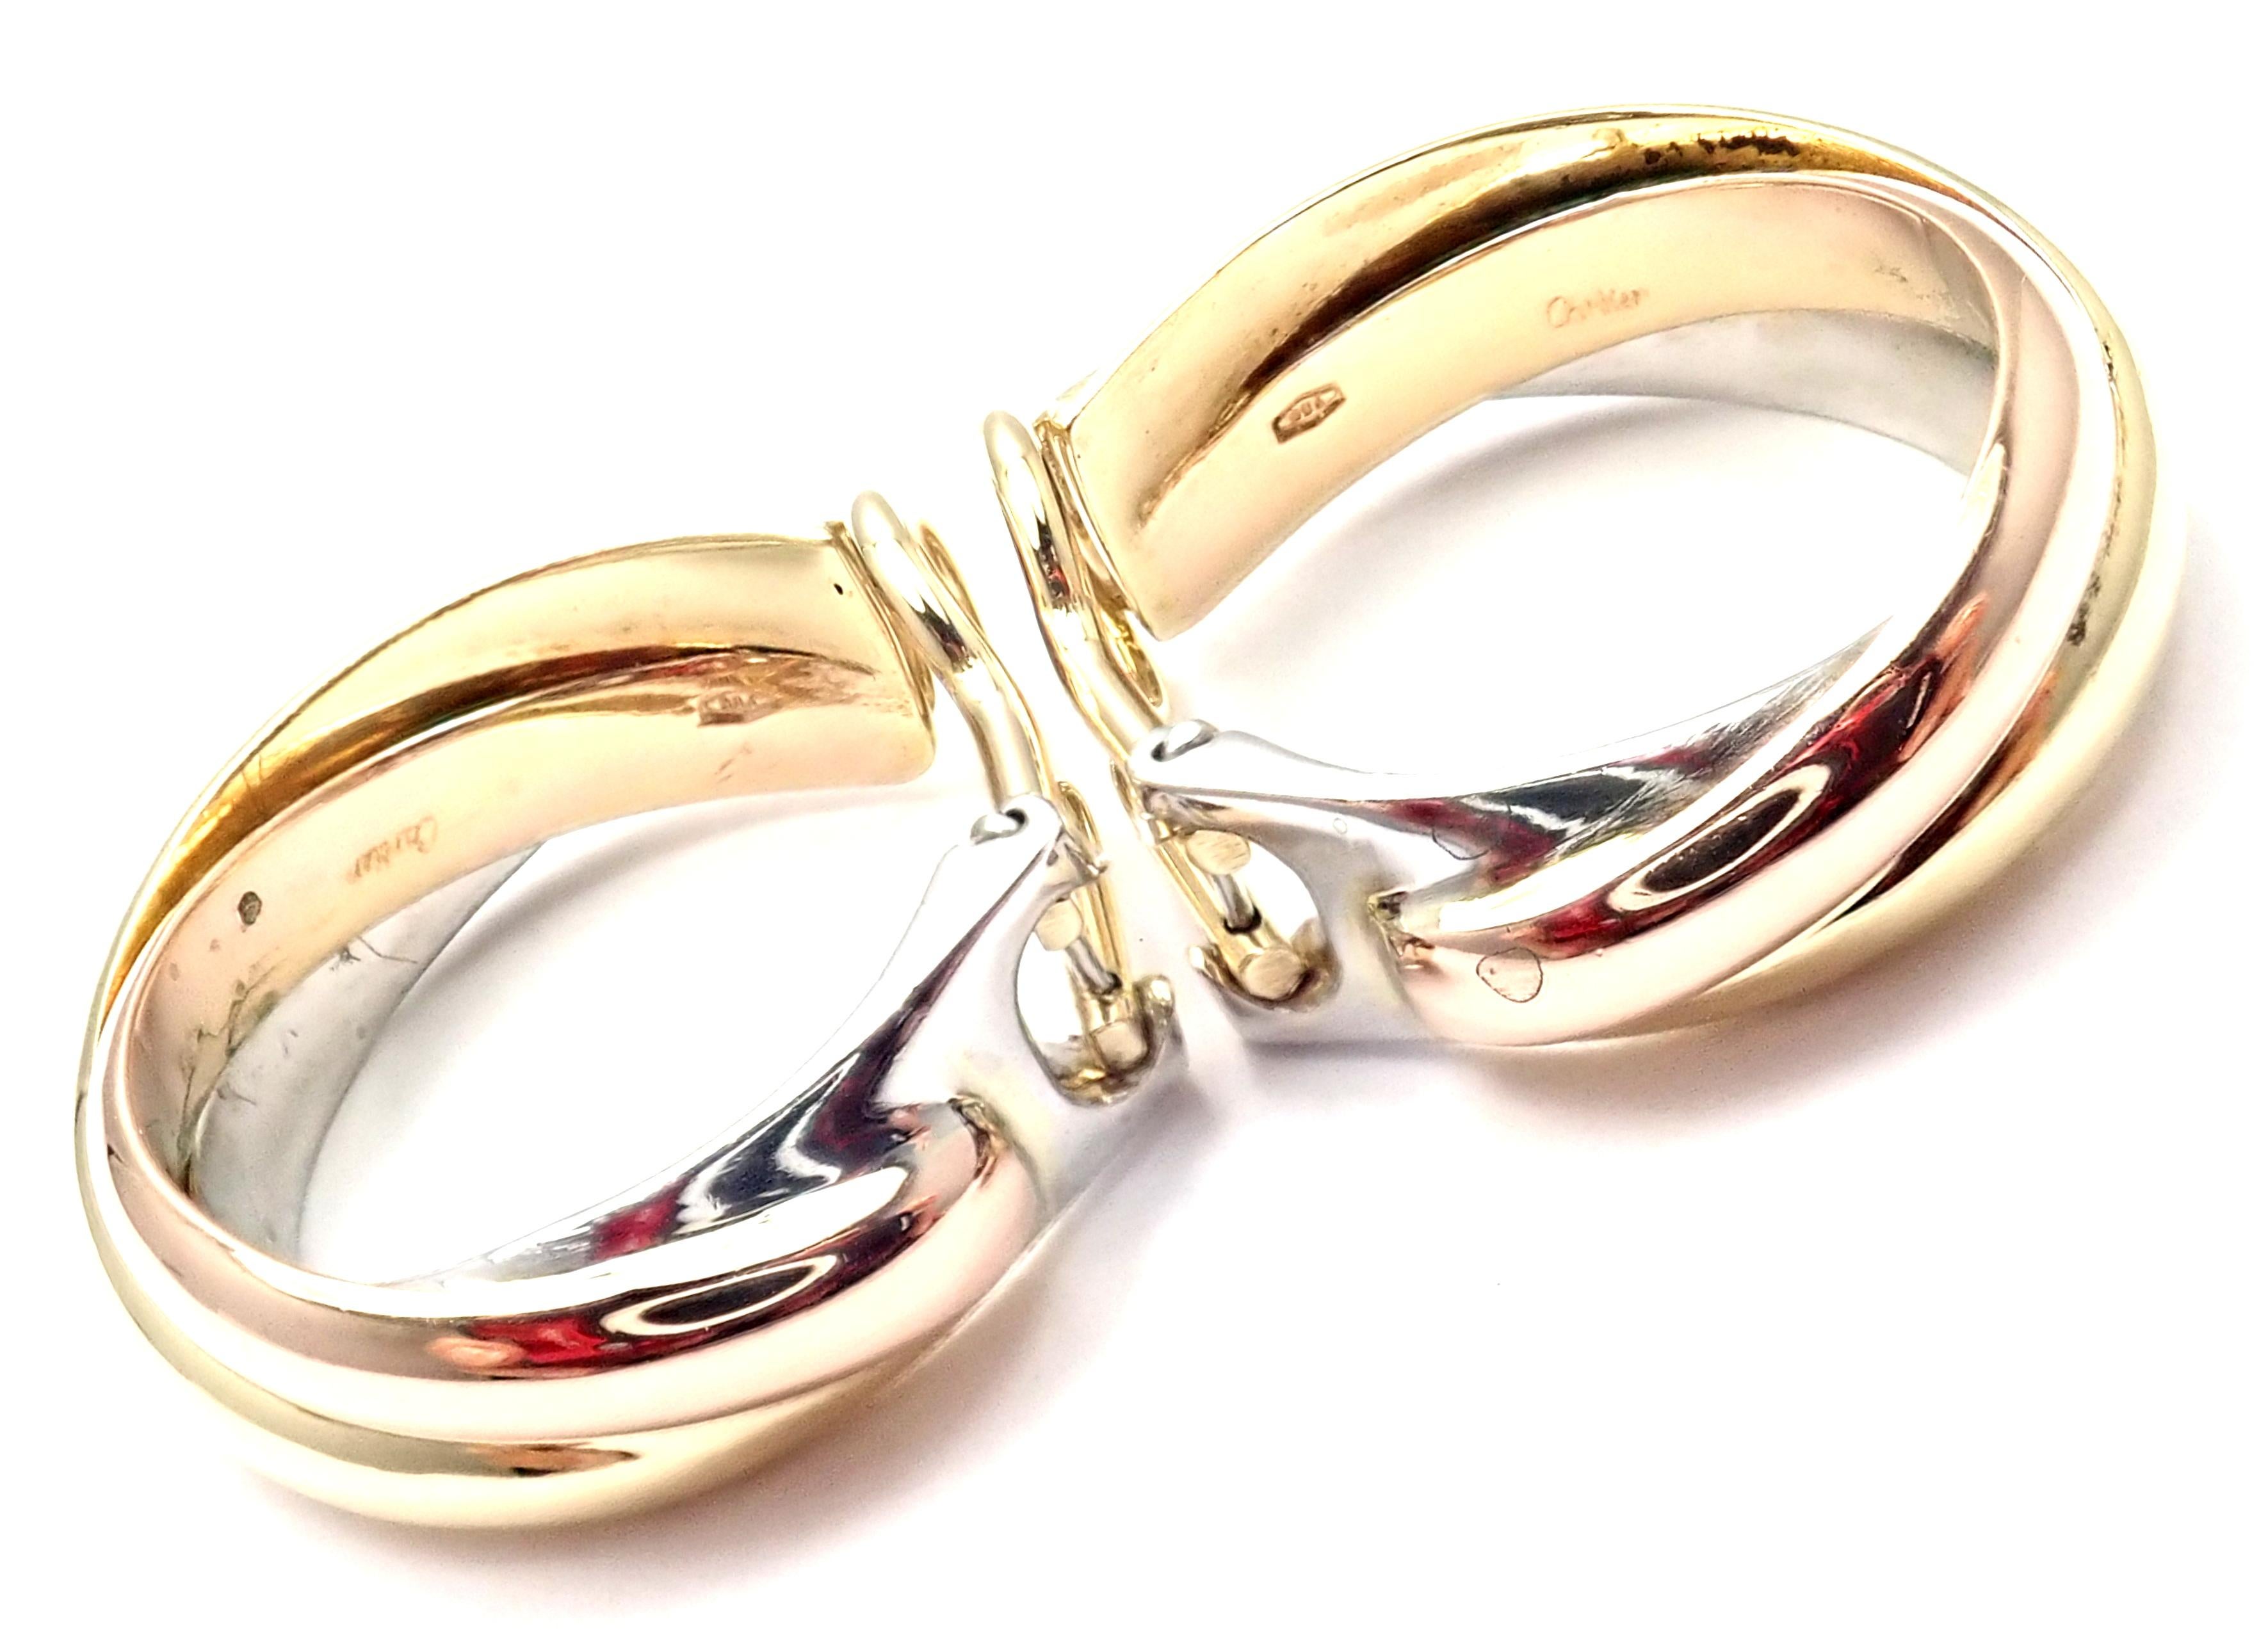 18k Tri-Color (Yellow, White, Rose) Gold Medium Size Trinity Hoop Earrings by Cartier. 
These earrings are for non pierced ears, but they can be converted by adding posts.
Details: 
Measurements: 24mm x 22mm x 7mm
Weight: 18.1 grams
Stamped